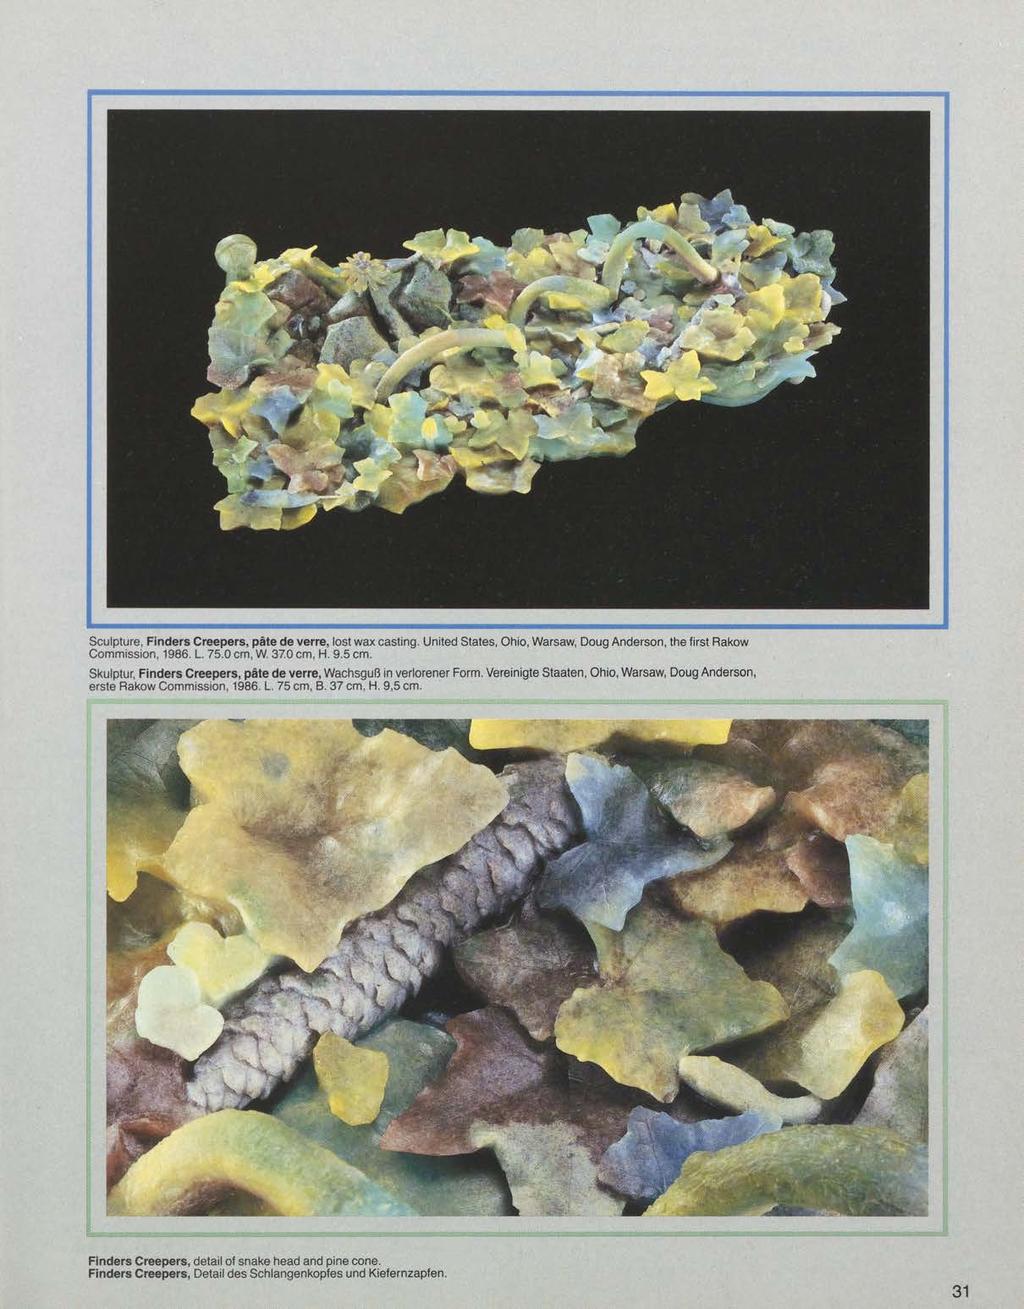 Sculpture, Finders Creepers, pate de verre, lost wax casting. United States, Ohio, Warsaw, Doug Anderson, the first Rakow Commission, 1986. L. 75.0 cm, W. 37.0 cm, H. 9.5 cm.